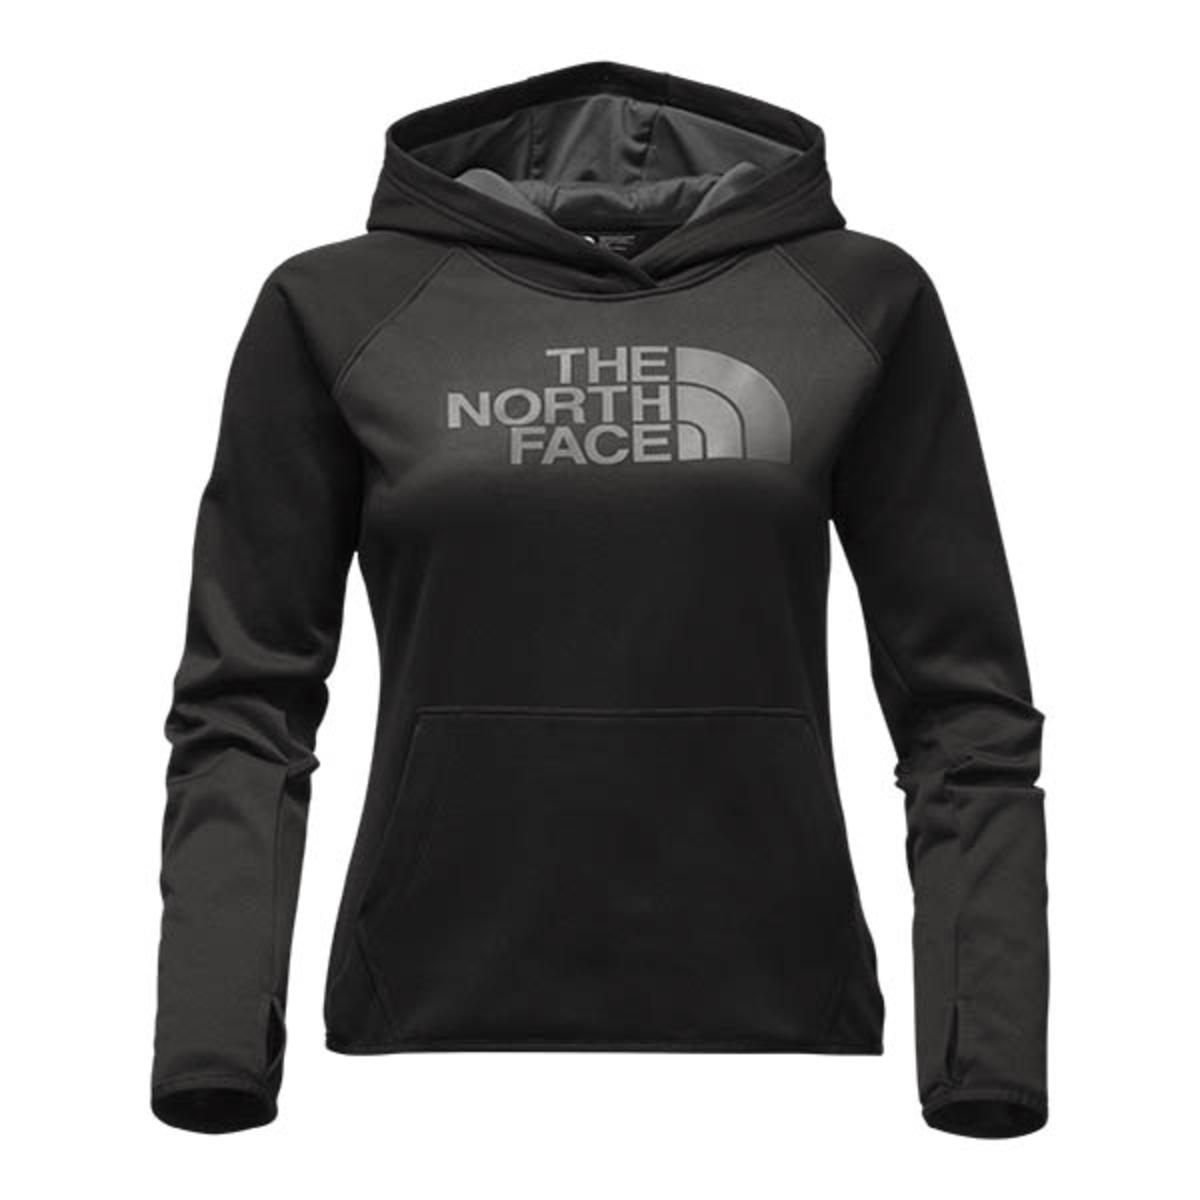 The North Face Women's Fave Half Dome Pull-Over Hoodie – Black/Asphalt ...